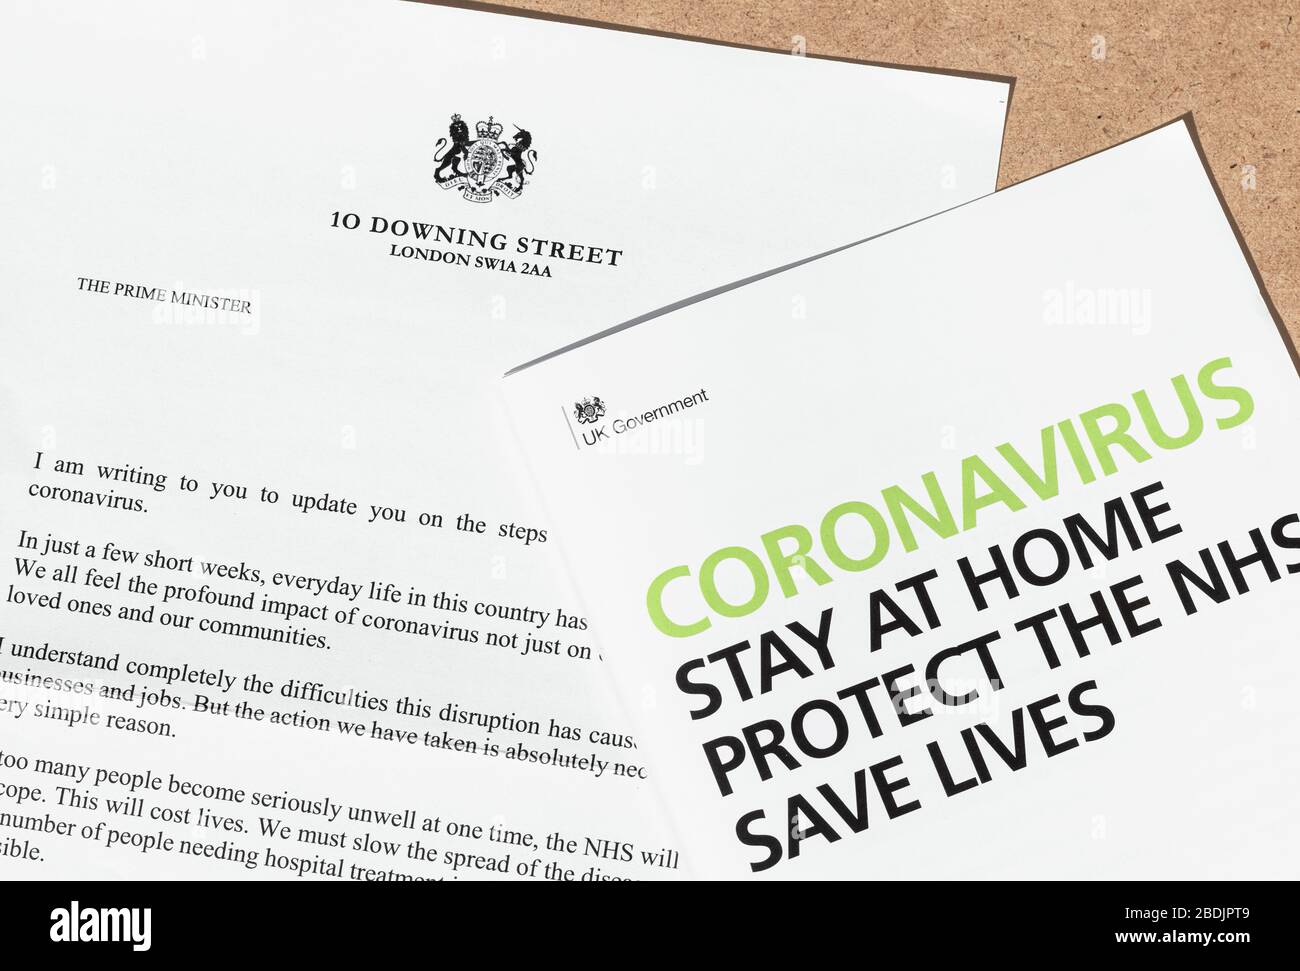 London / UK - April 7th 2020 - Coronavirus information letter and pamphlet from the UK government, sent to each household during the pandemic Stock Photo